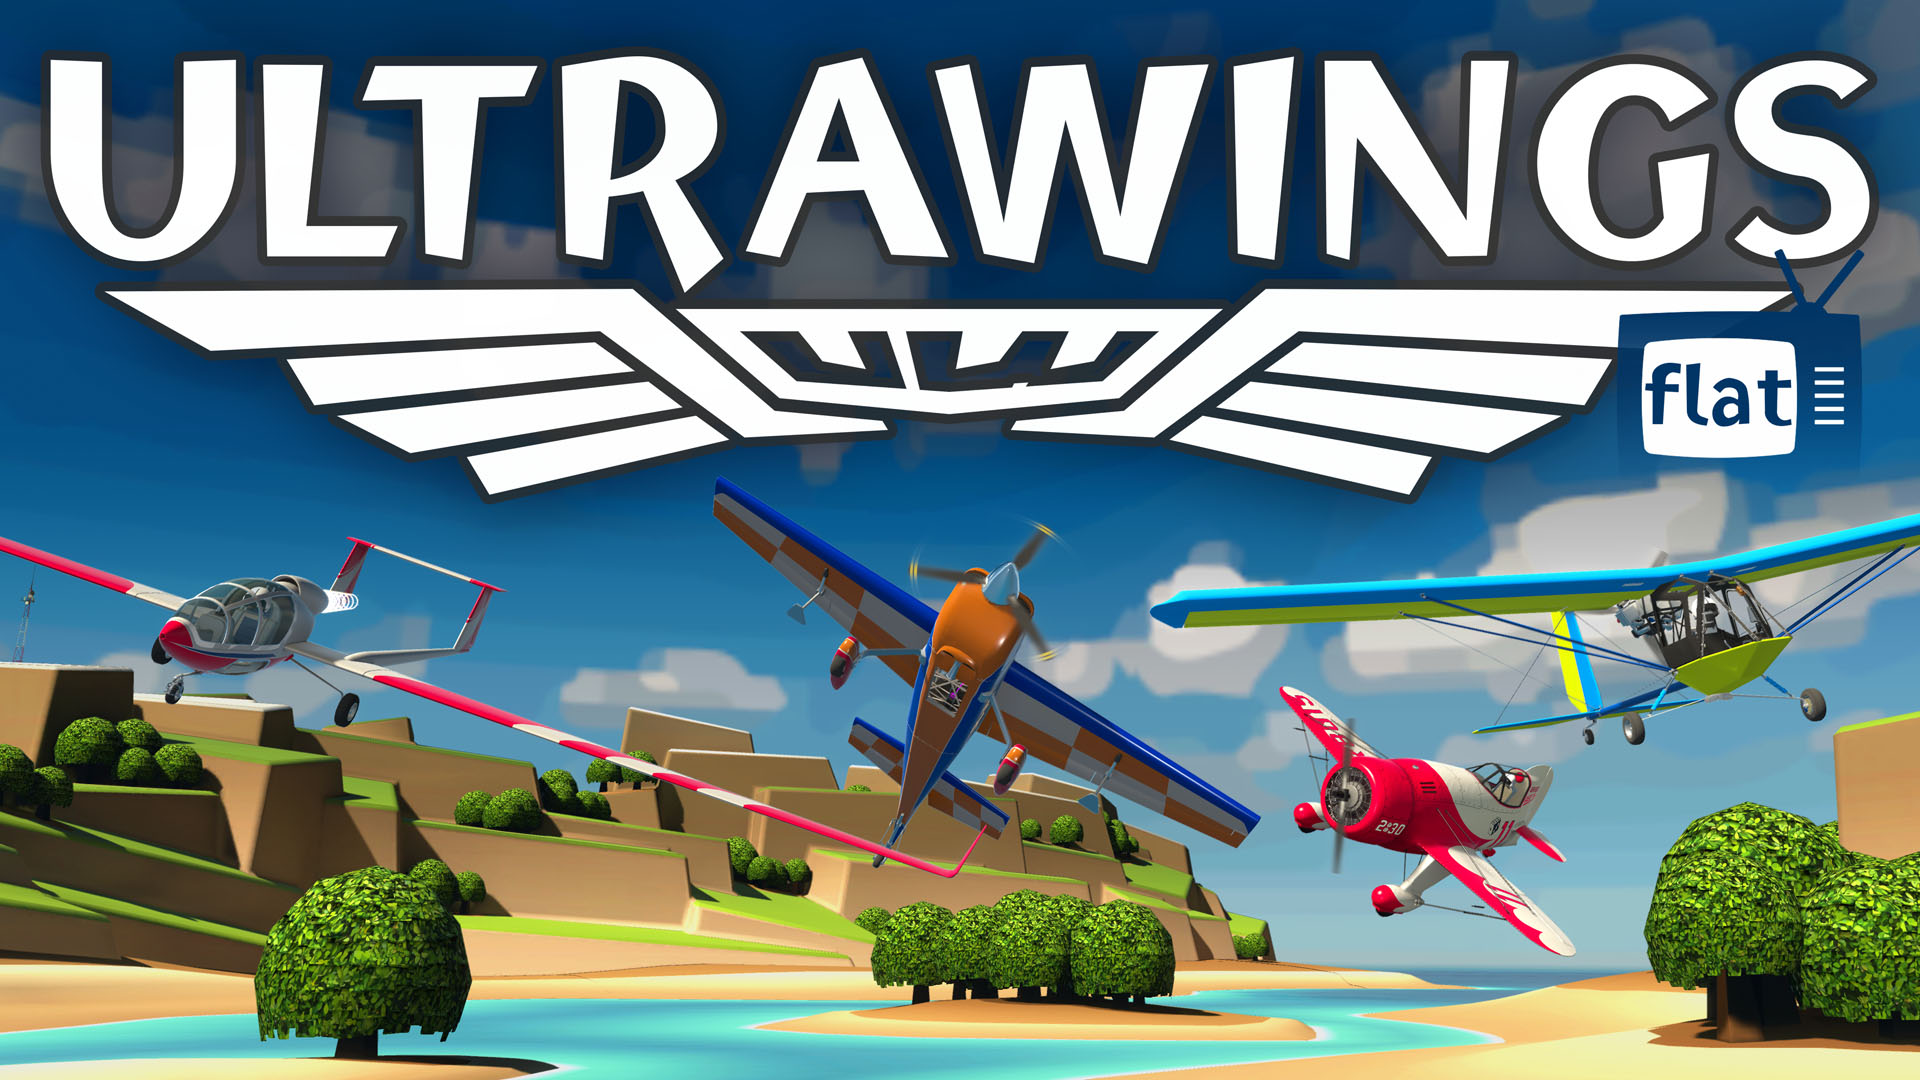 Ultrawings Flat - Nintendo Switch Game | Track prices on eShop for  discounted games